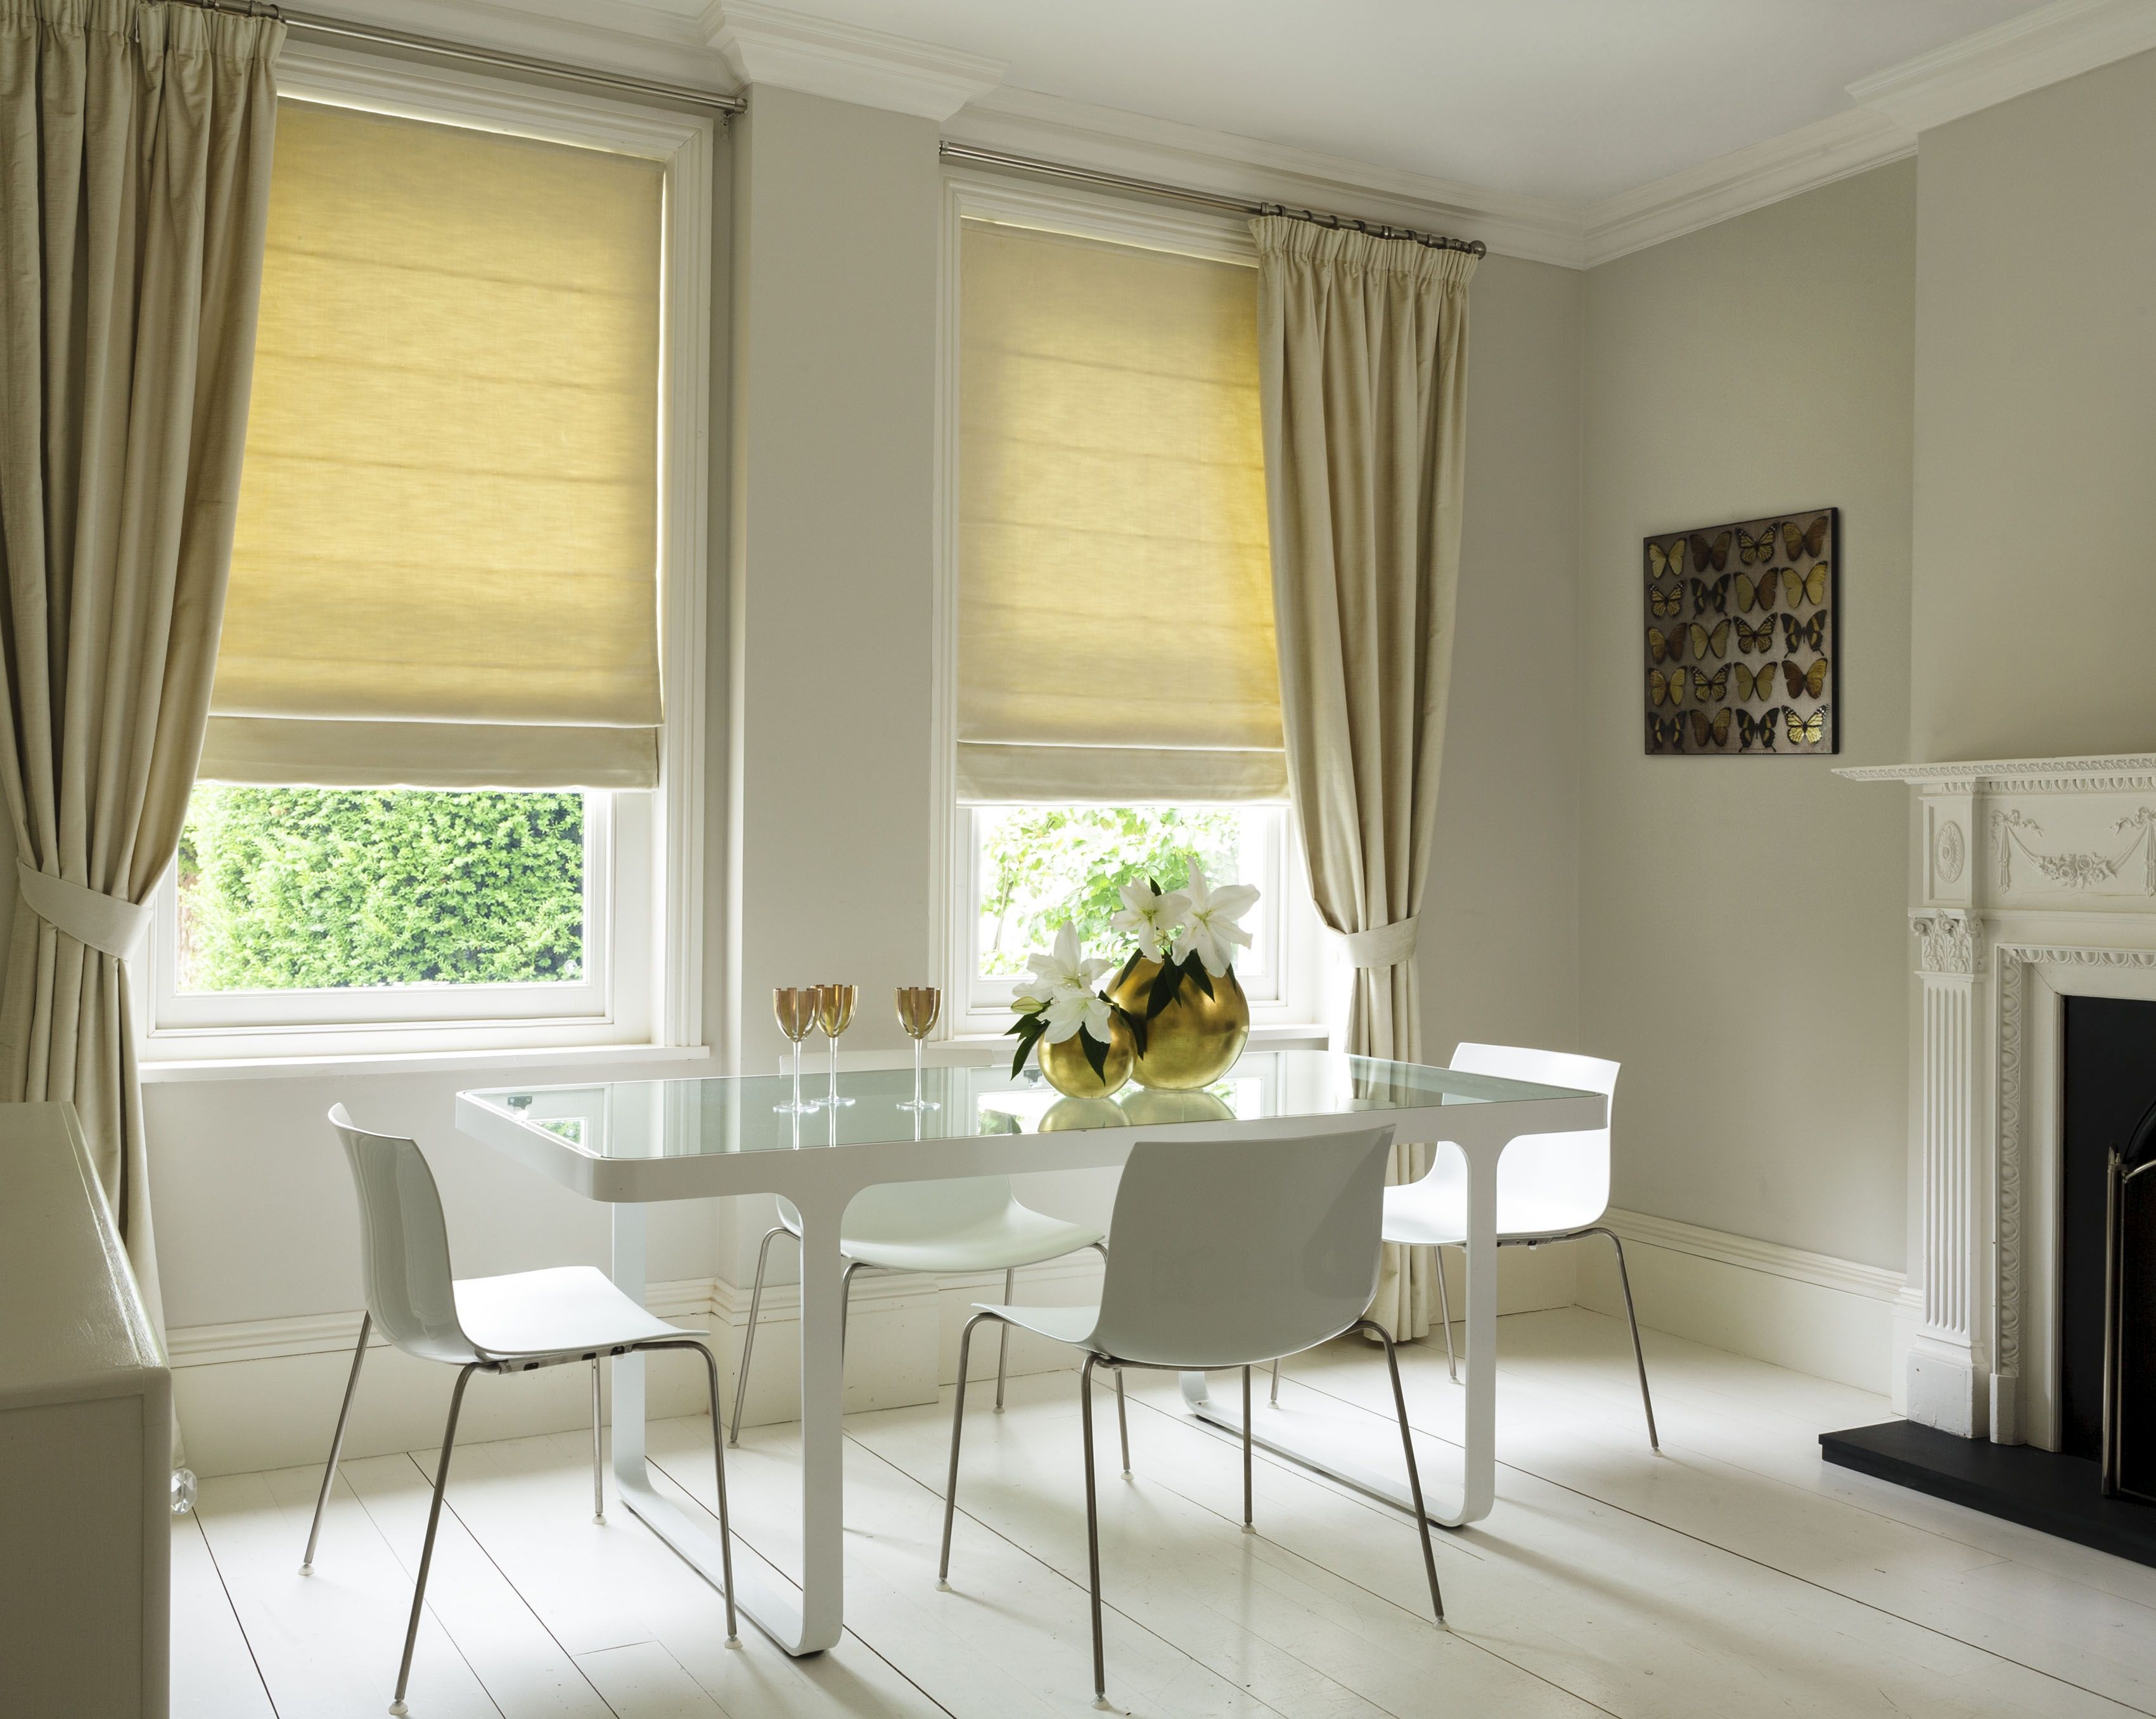 Cheapest Blinds Uk Ltd Black Roman Blinds With Regard To Black And White Roman Blinds (Photo 13 of 15)